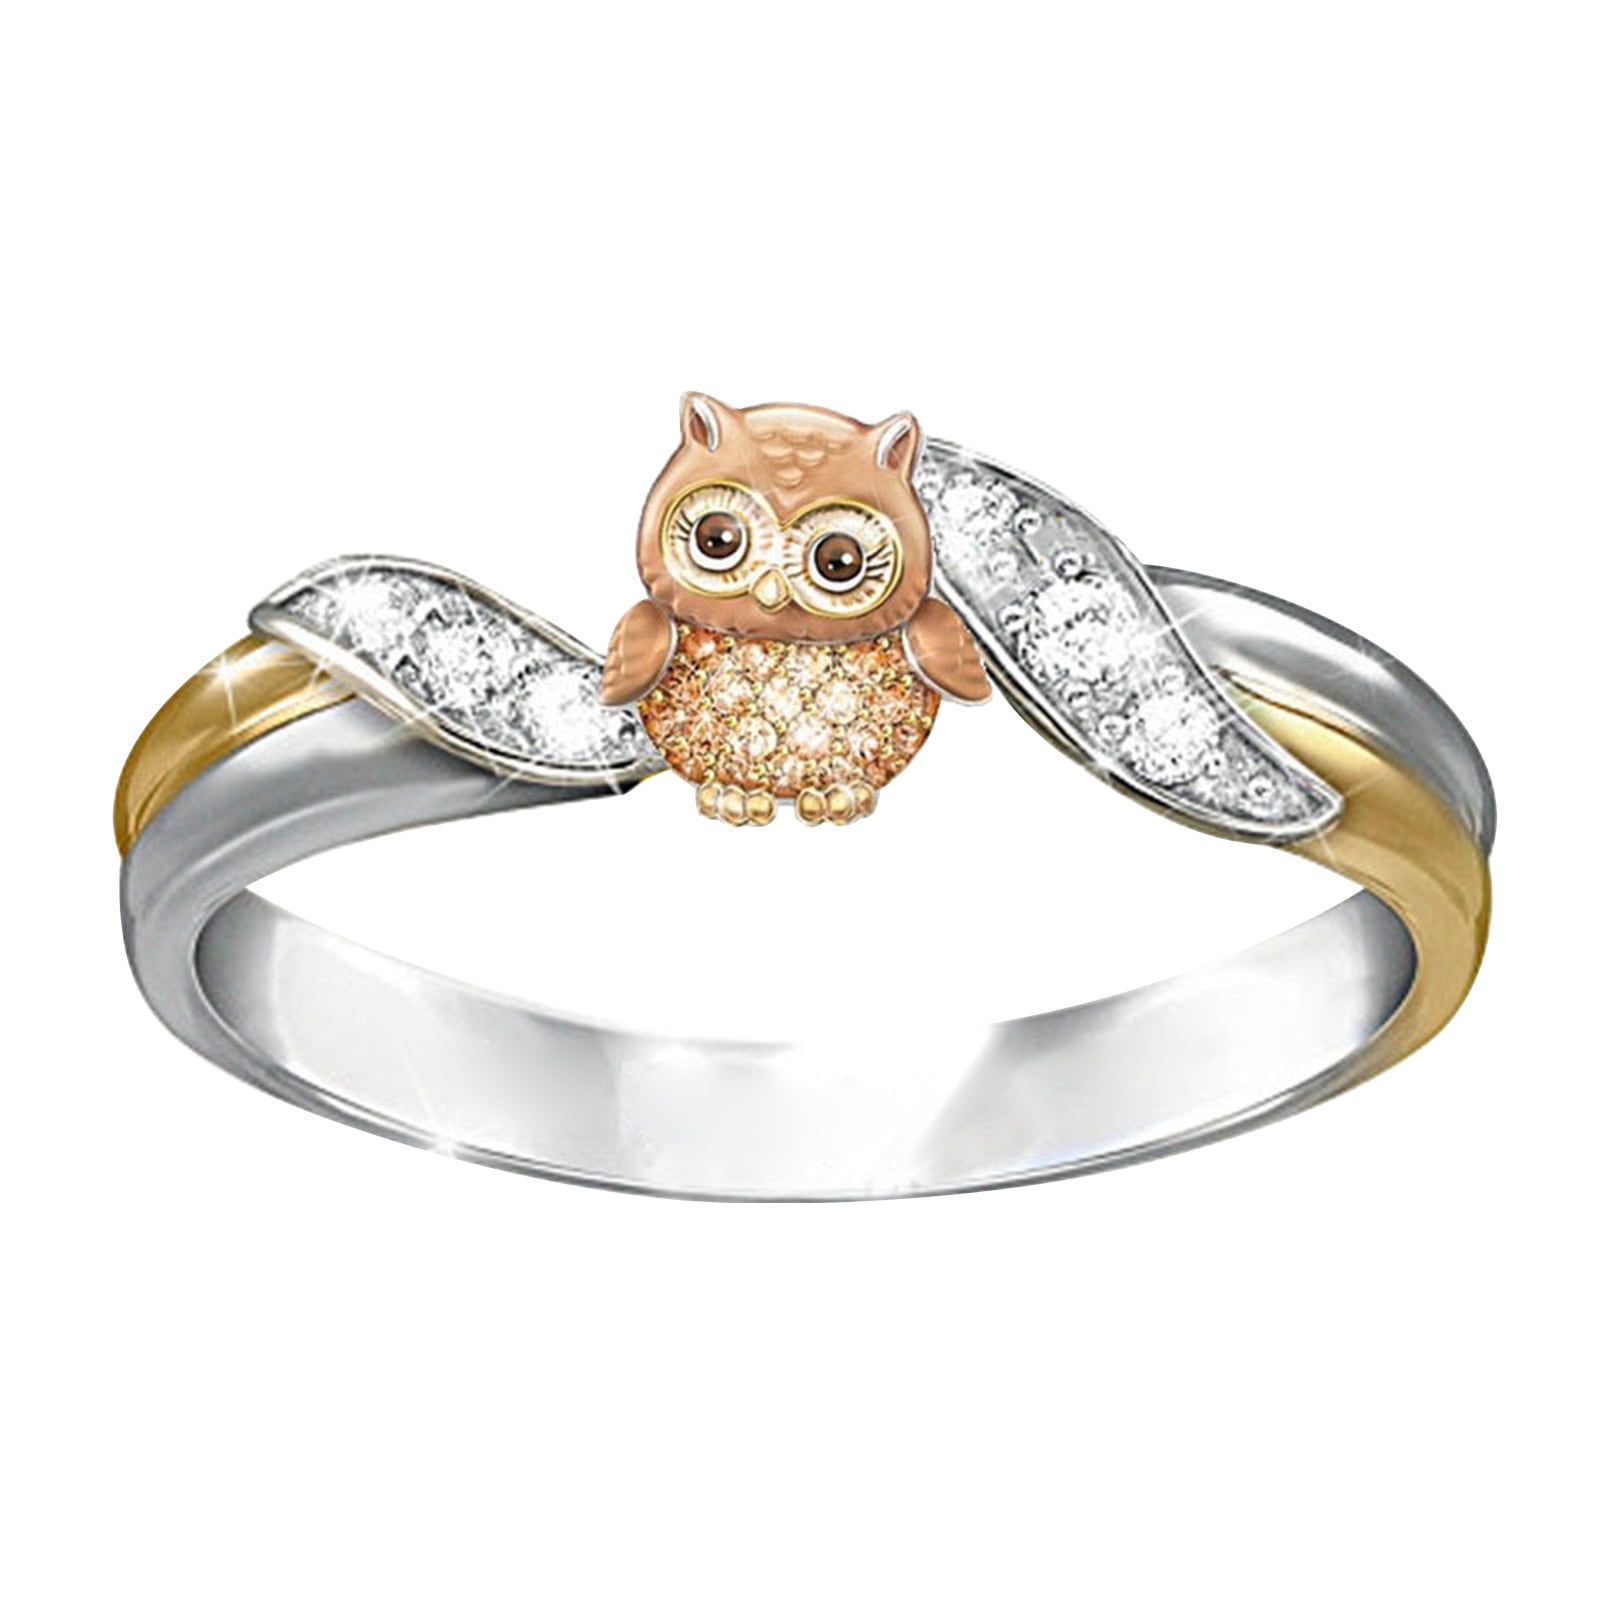 Owl's paw ring Silver owl's paw Paw owl ring Owl jewelry Paw ring Animal jewelry Unique Wedding ring gift Garden jewelry